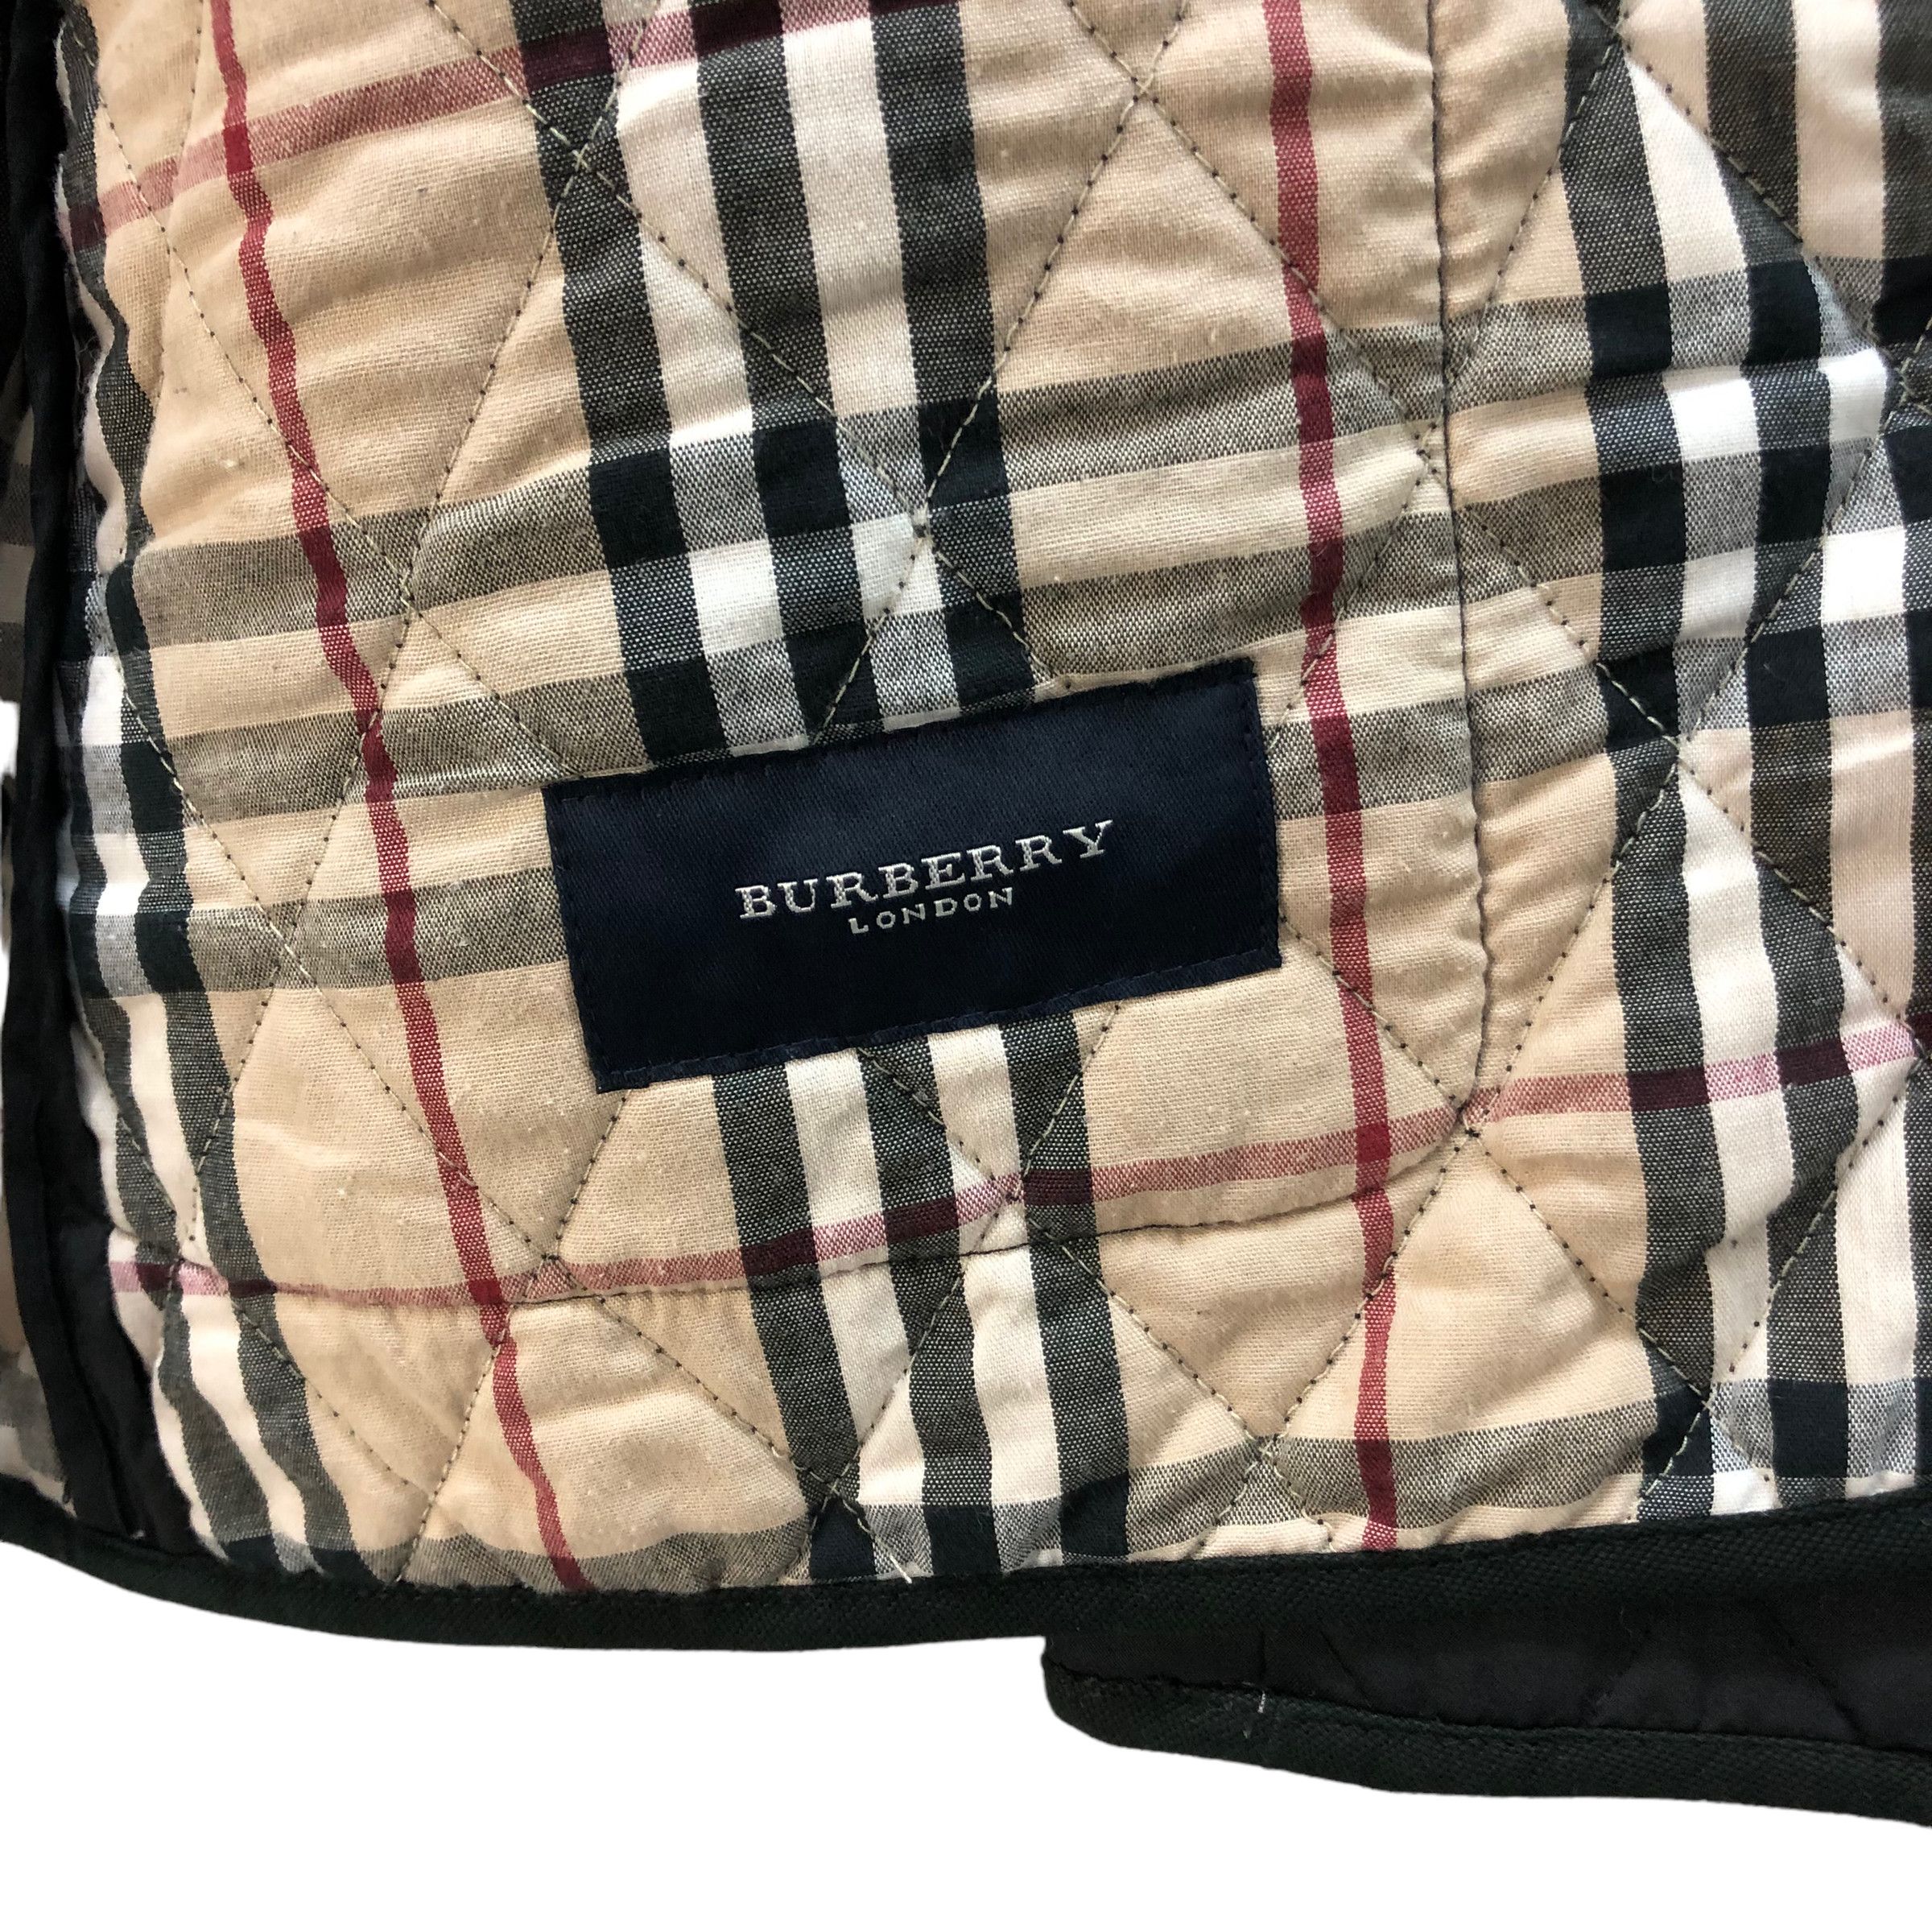 BURBERRY LONDON NOVA CHECK QUILTED JACKET #7238-120 - 7